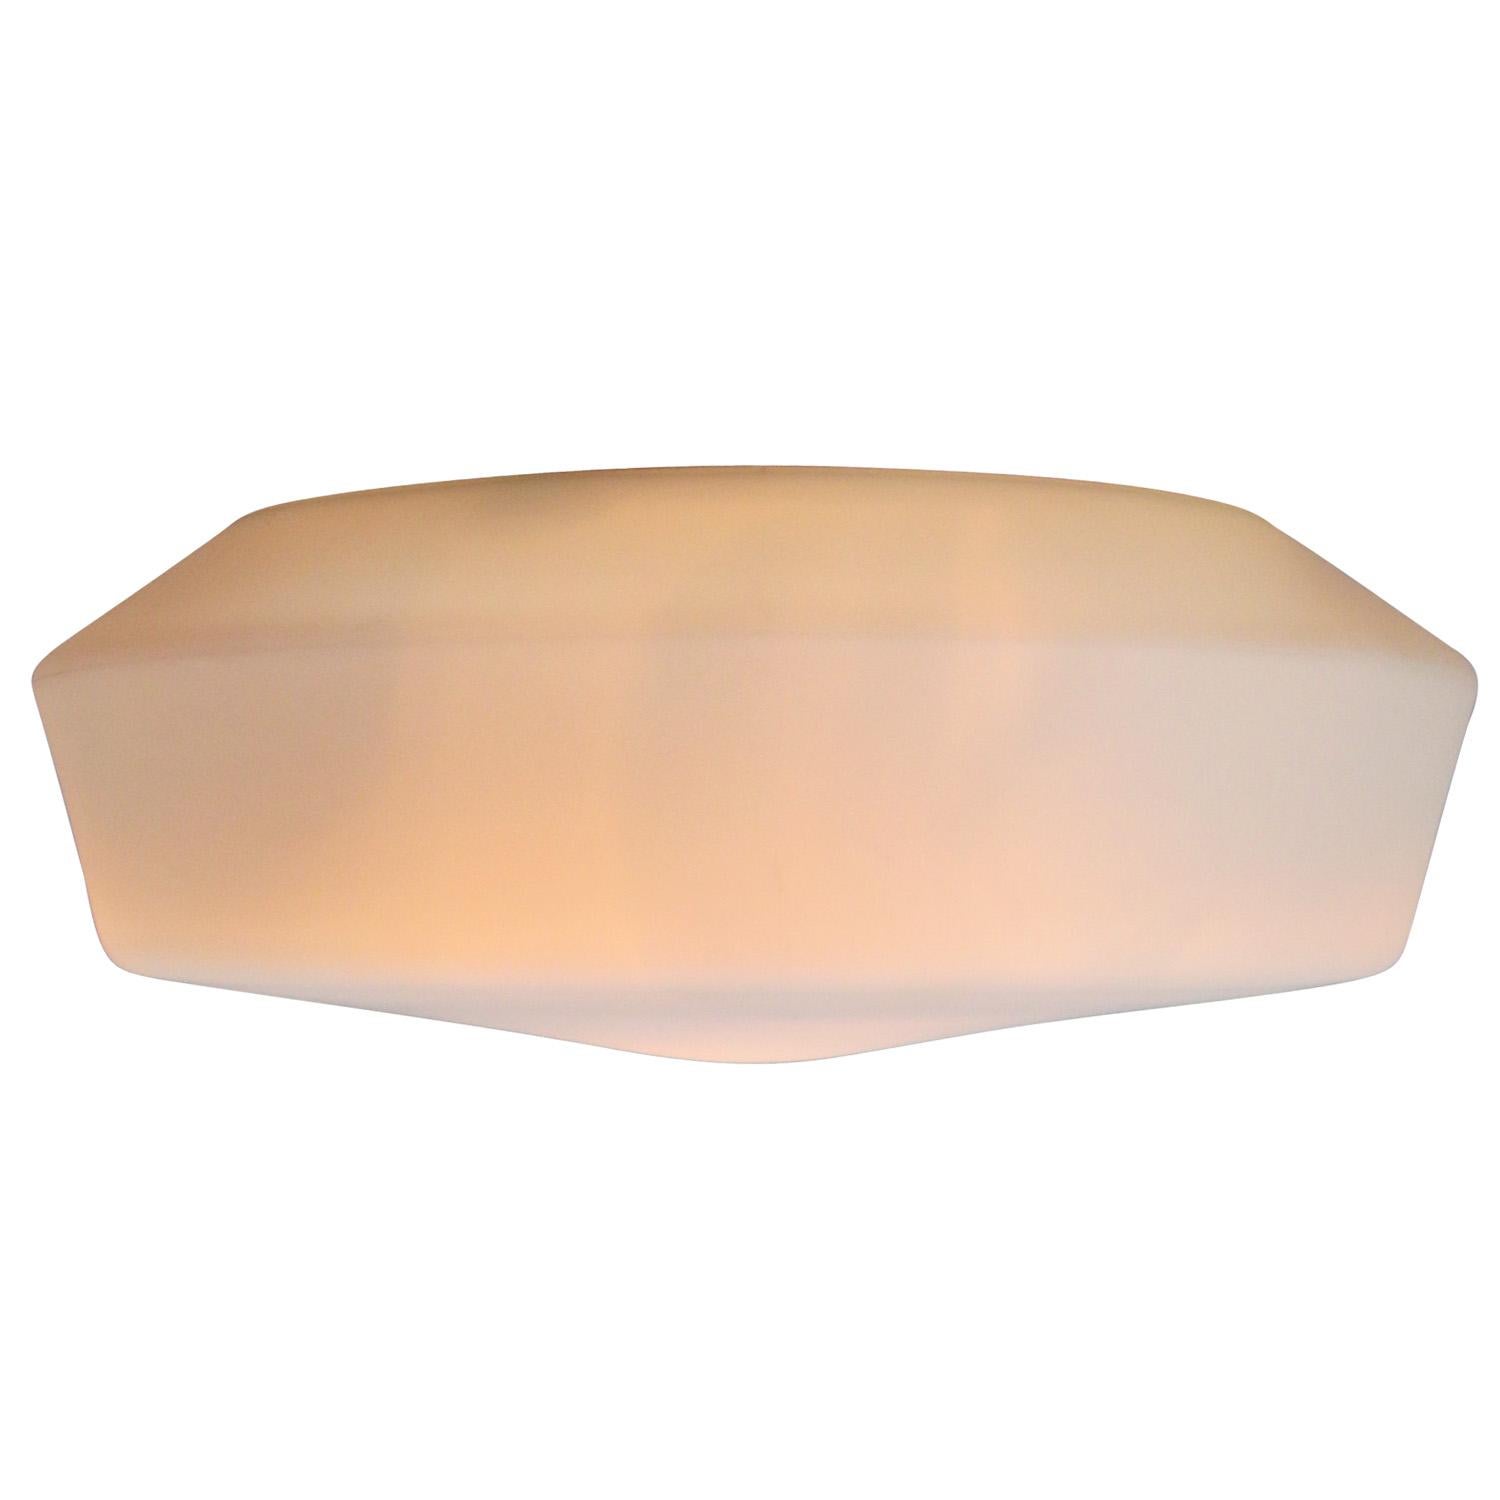 Large German Opaline industrial ceiling lamp.
DKN Leuchten made by RZB Rudolph Zimmerman Bamberg Leuchten

Designed by Rudolph Zimmerman
Metal base with white opaline glass

1x E27 / E26

Weight: 1.00 kg / 2.2 lb

PPriced per individual